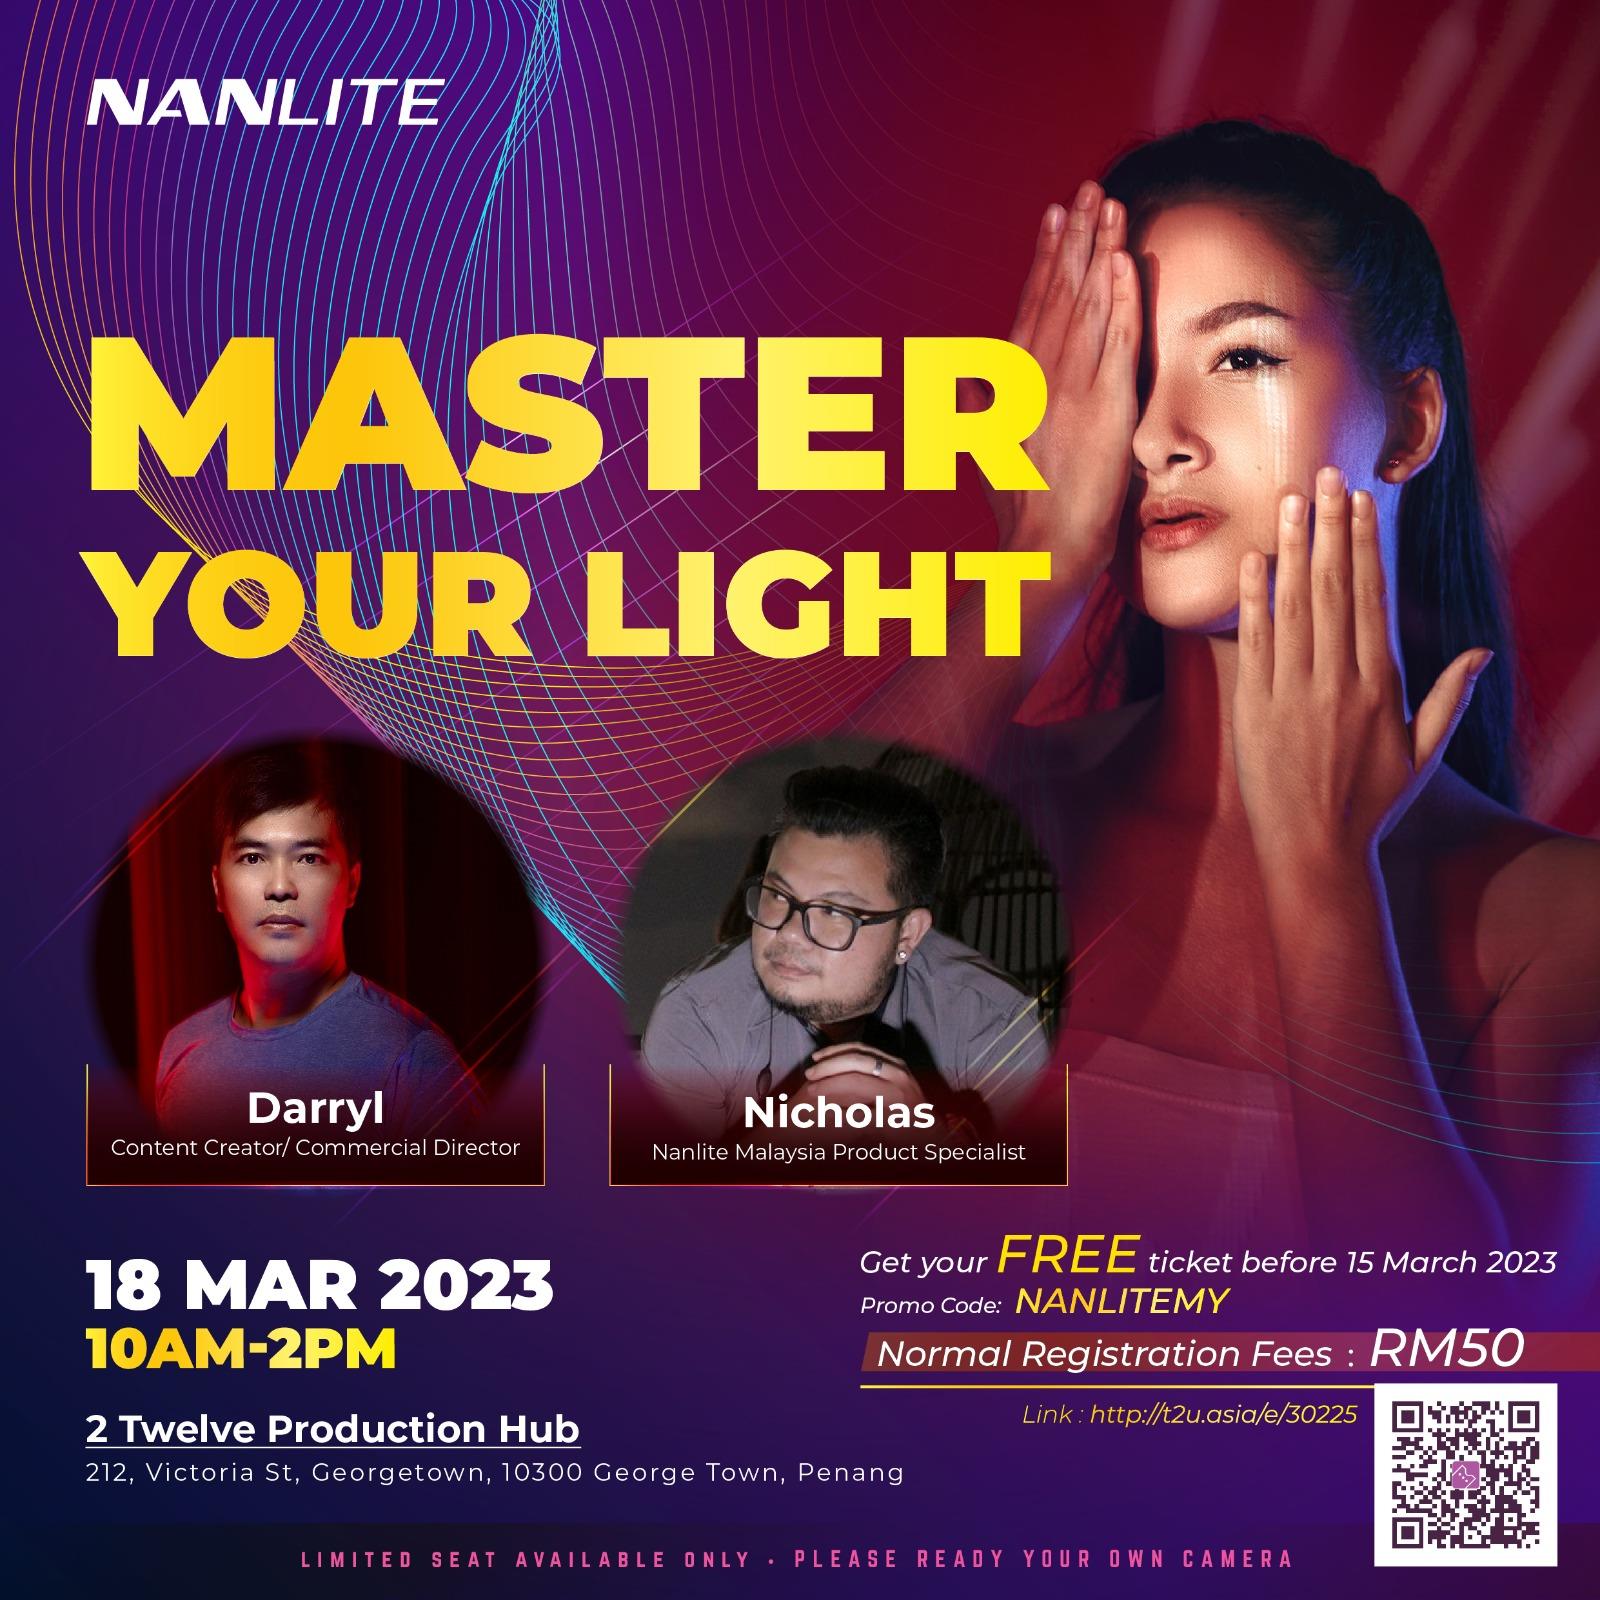 Master Your Light by NANLITE